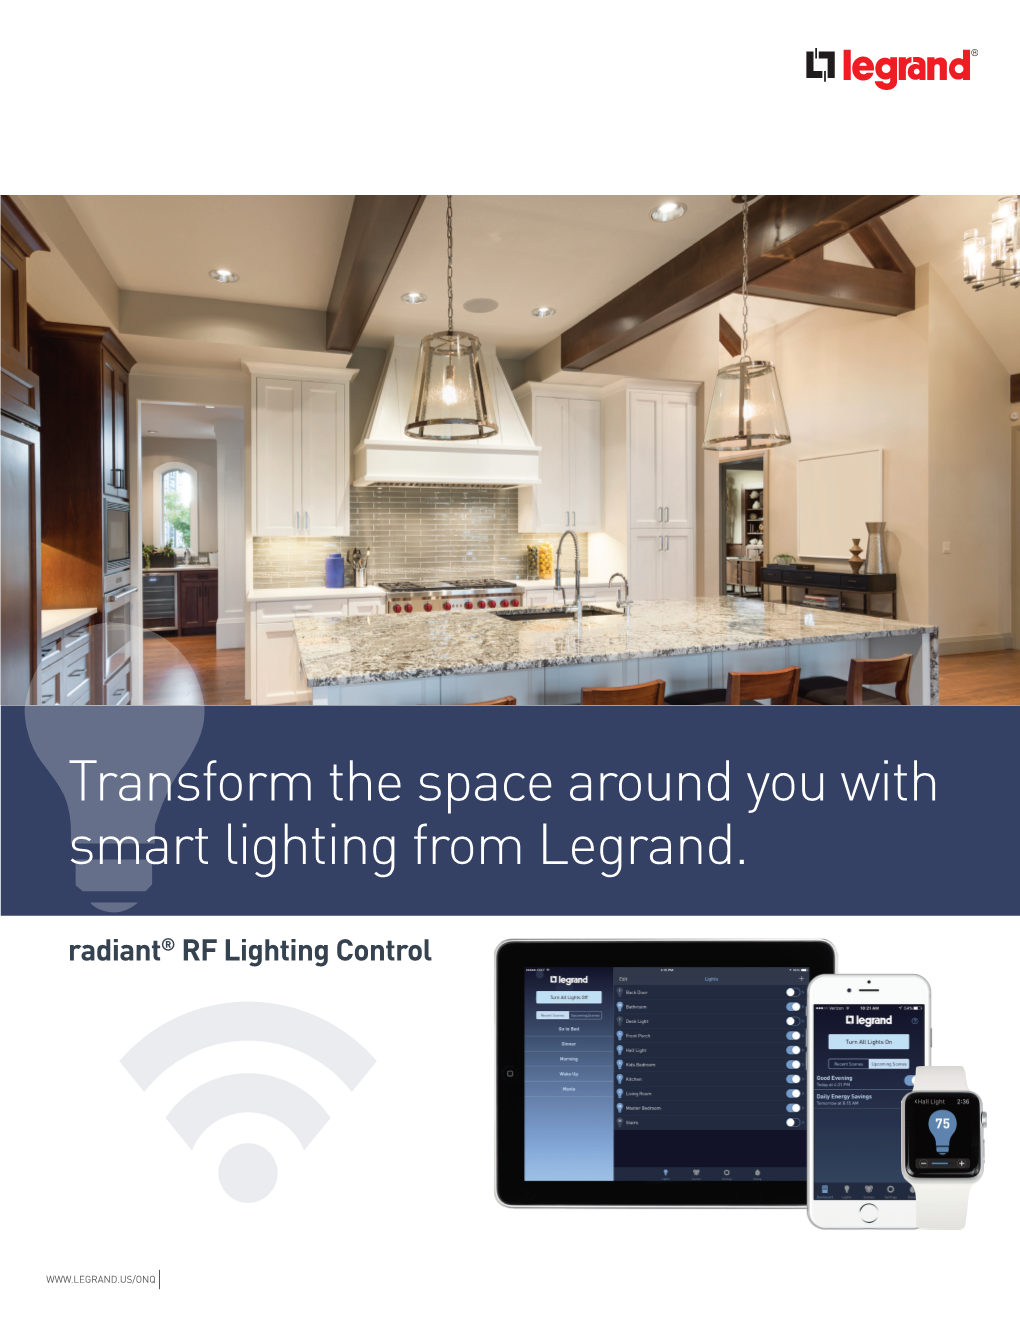 Transform the Space Around You with Smart Lighting from Legrand